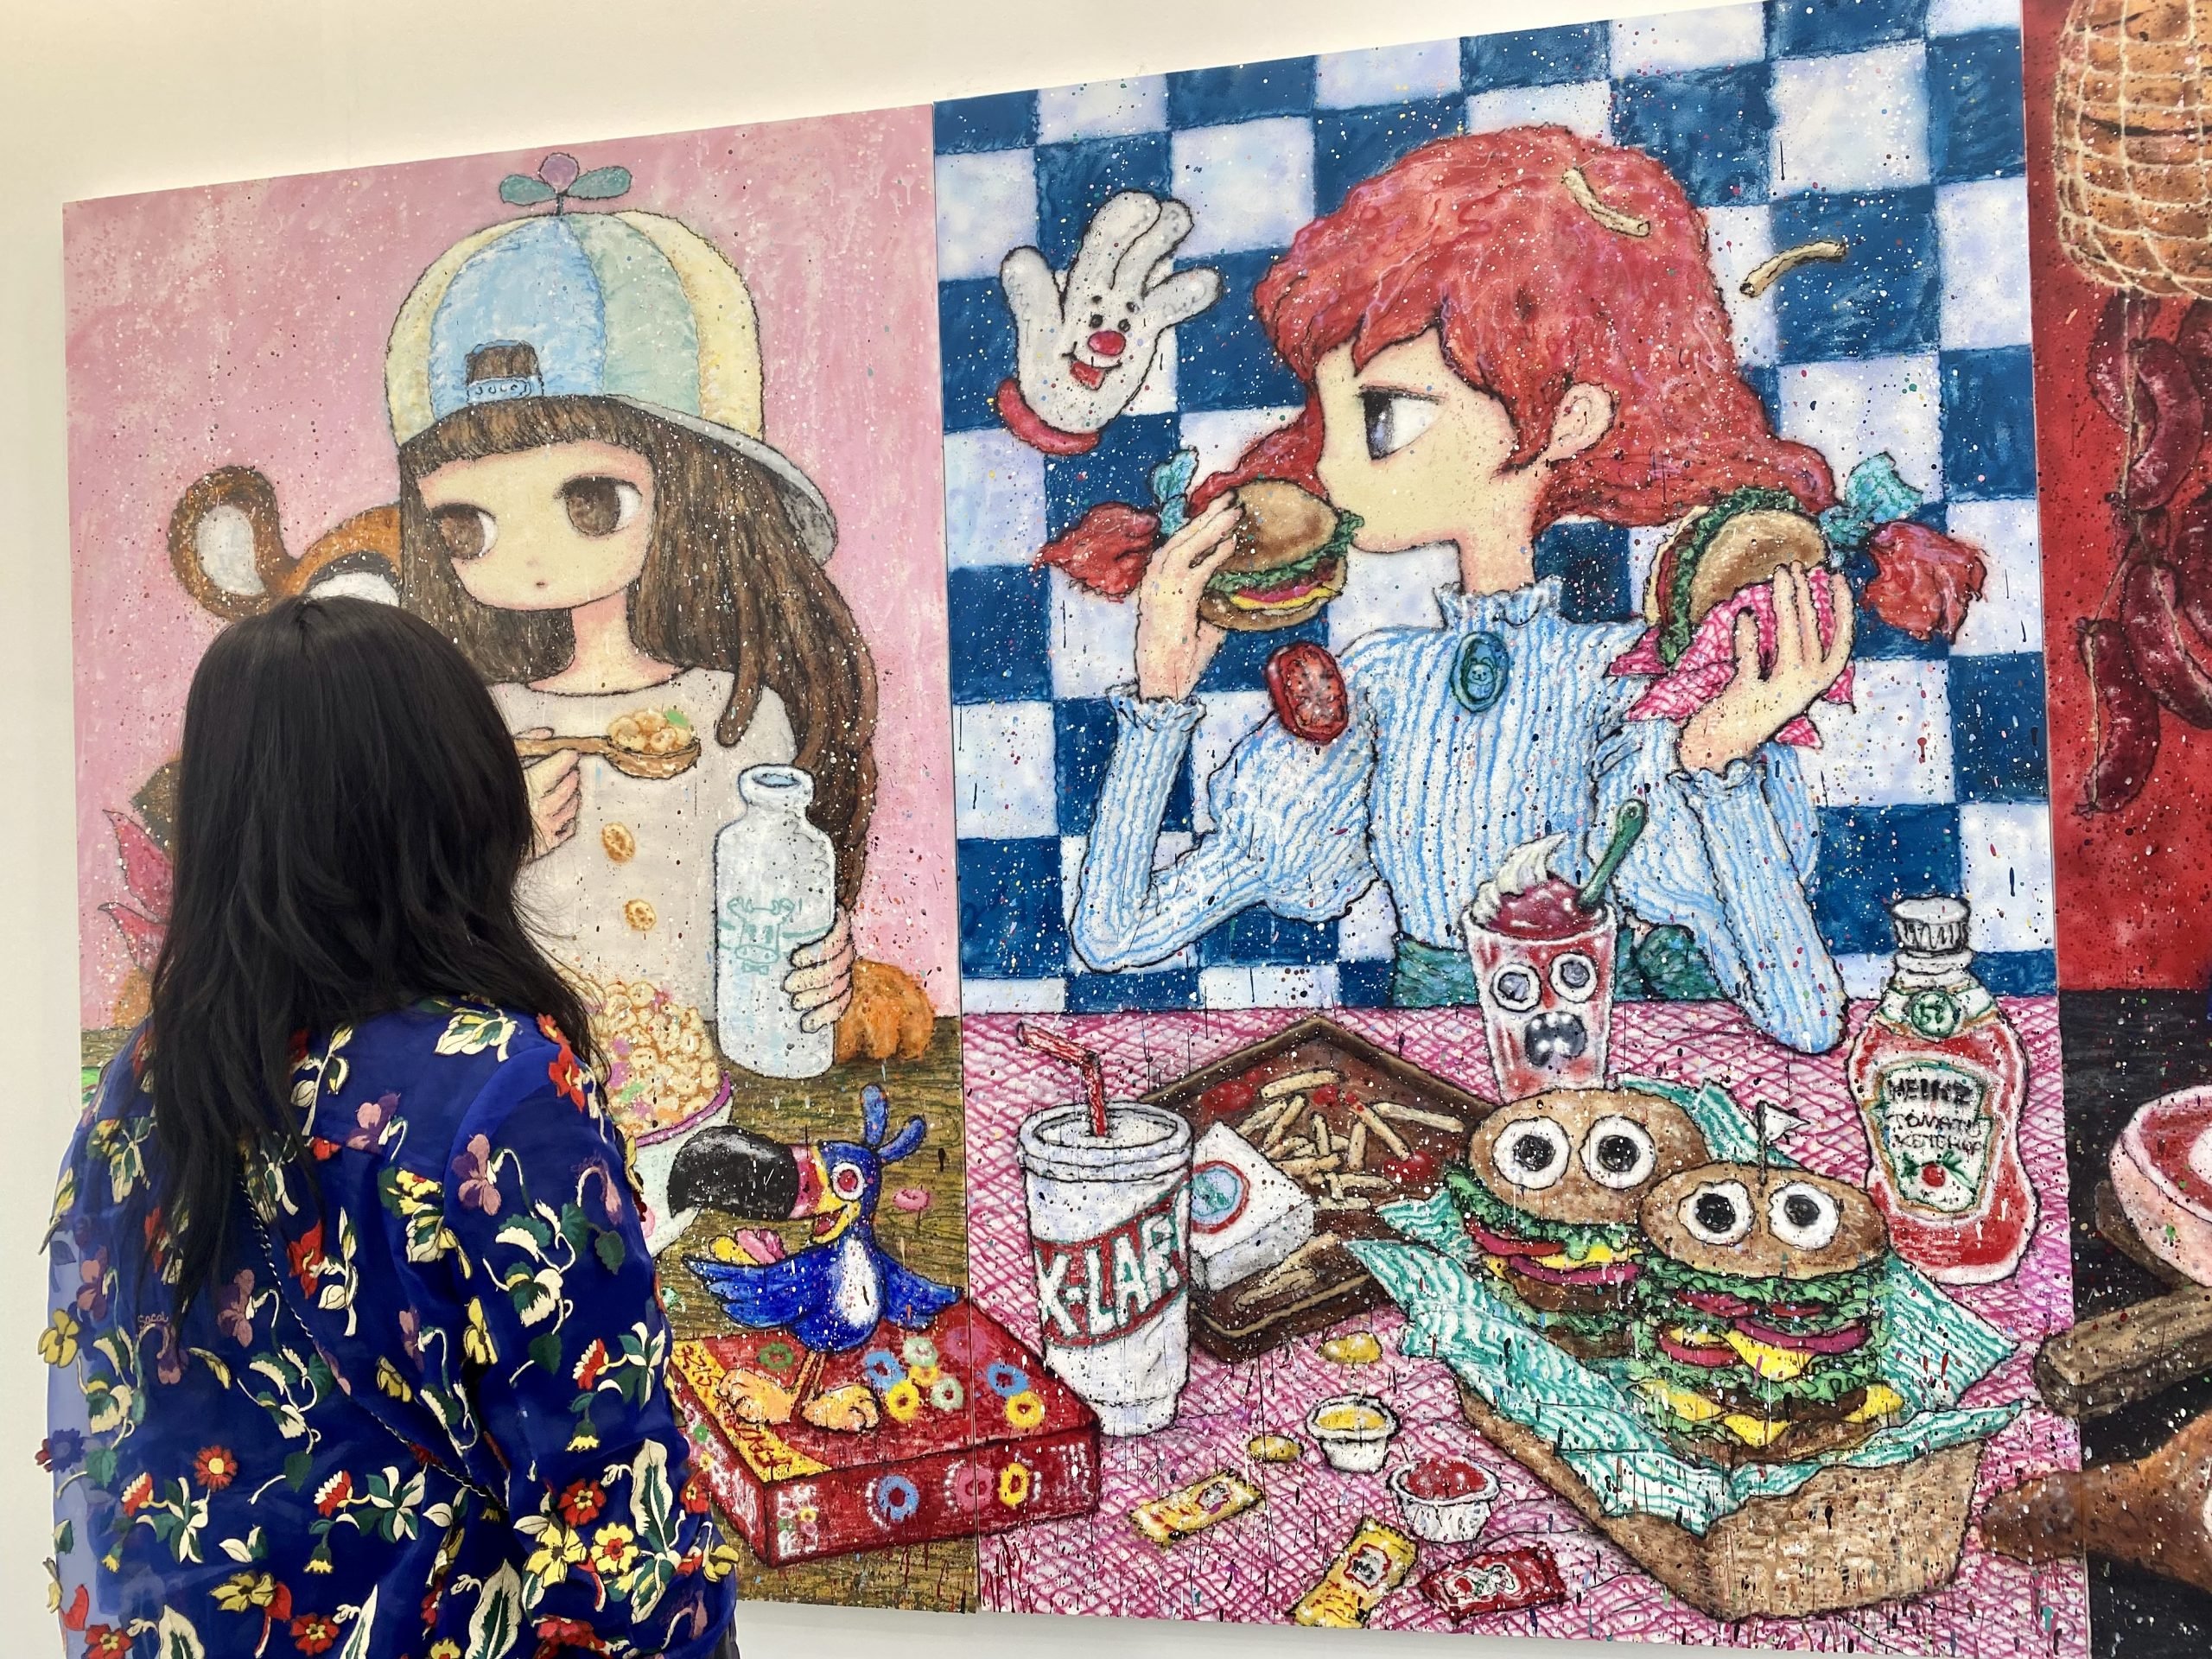 Meet Stickymonger, Whose Anime-Infused 'Last Supper' Paintings Are a  Sold-Out Hit at Untitled Art Miami Beach